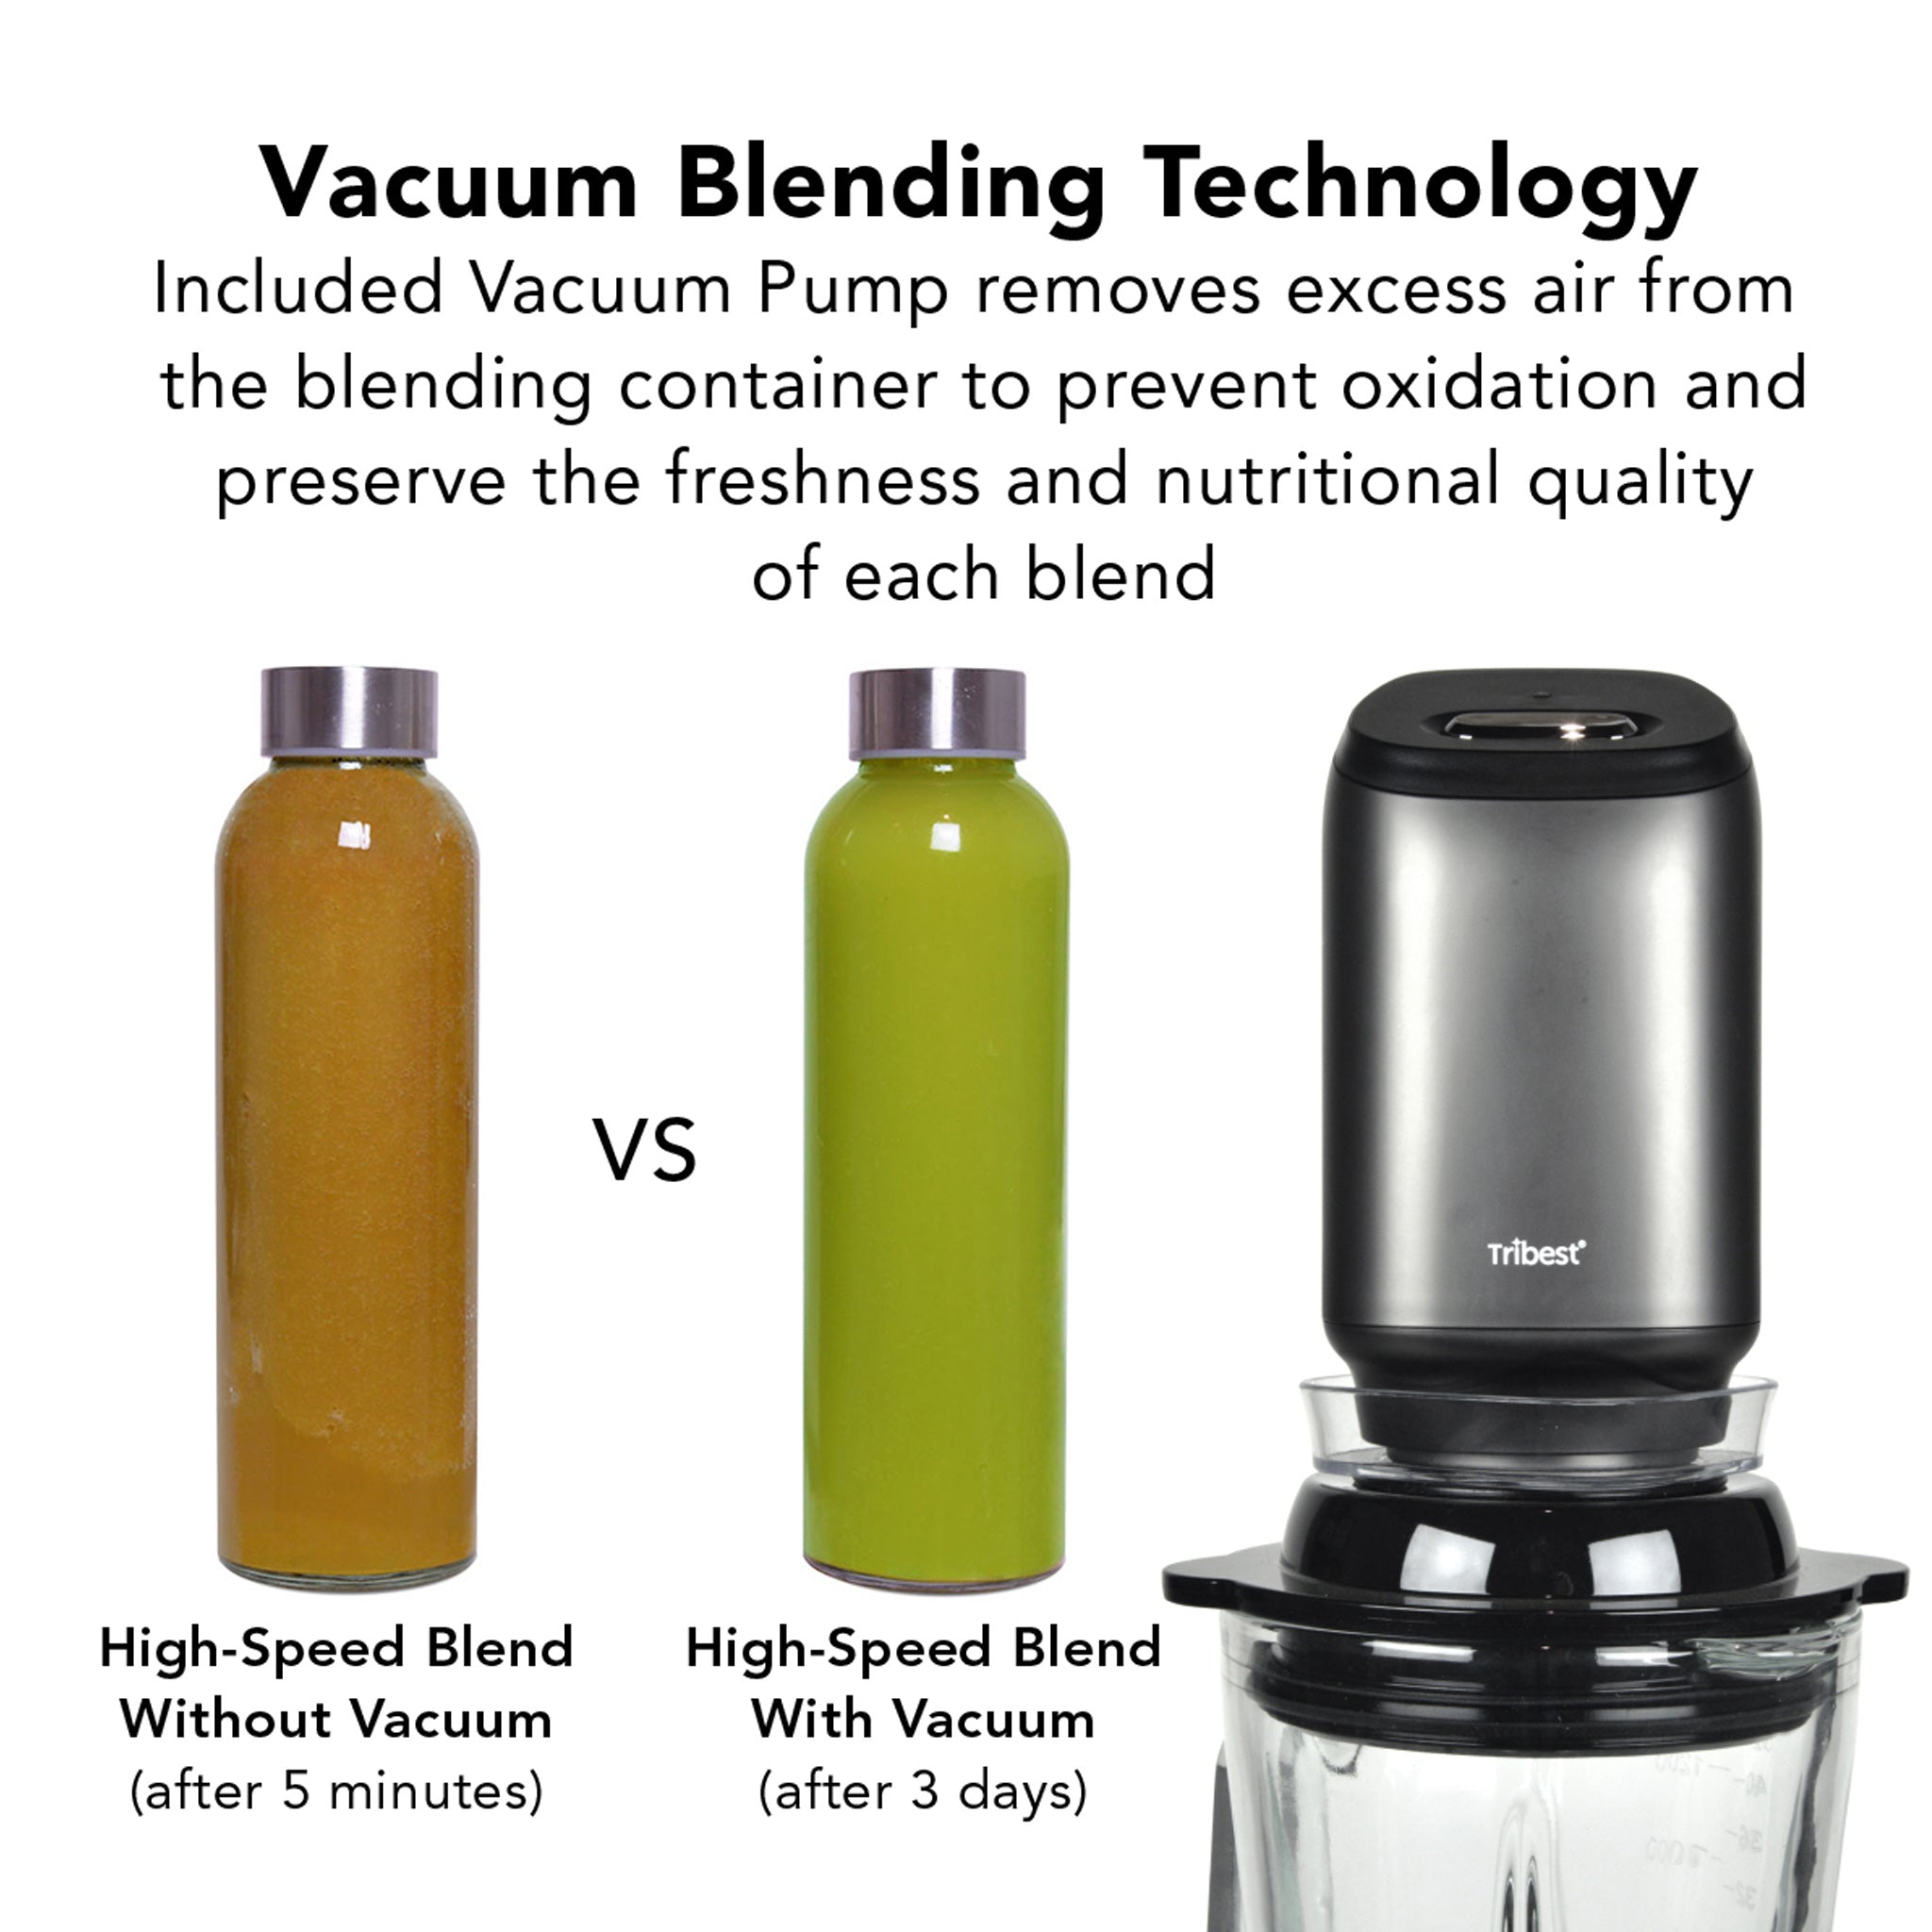 Glass Personal Blender with Vacuum PBG-5001 - Green Apples Comparison - Tribest